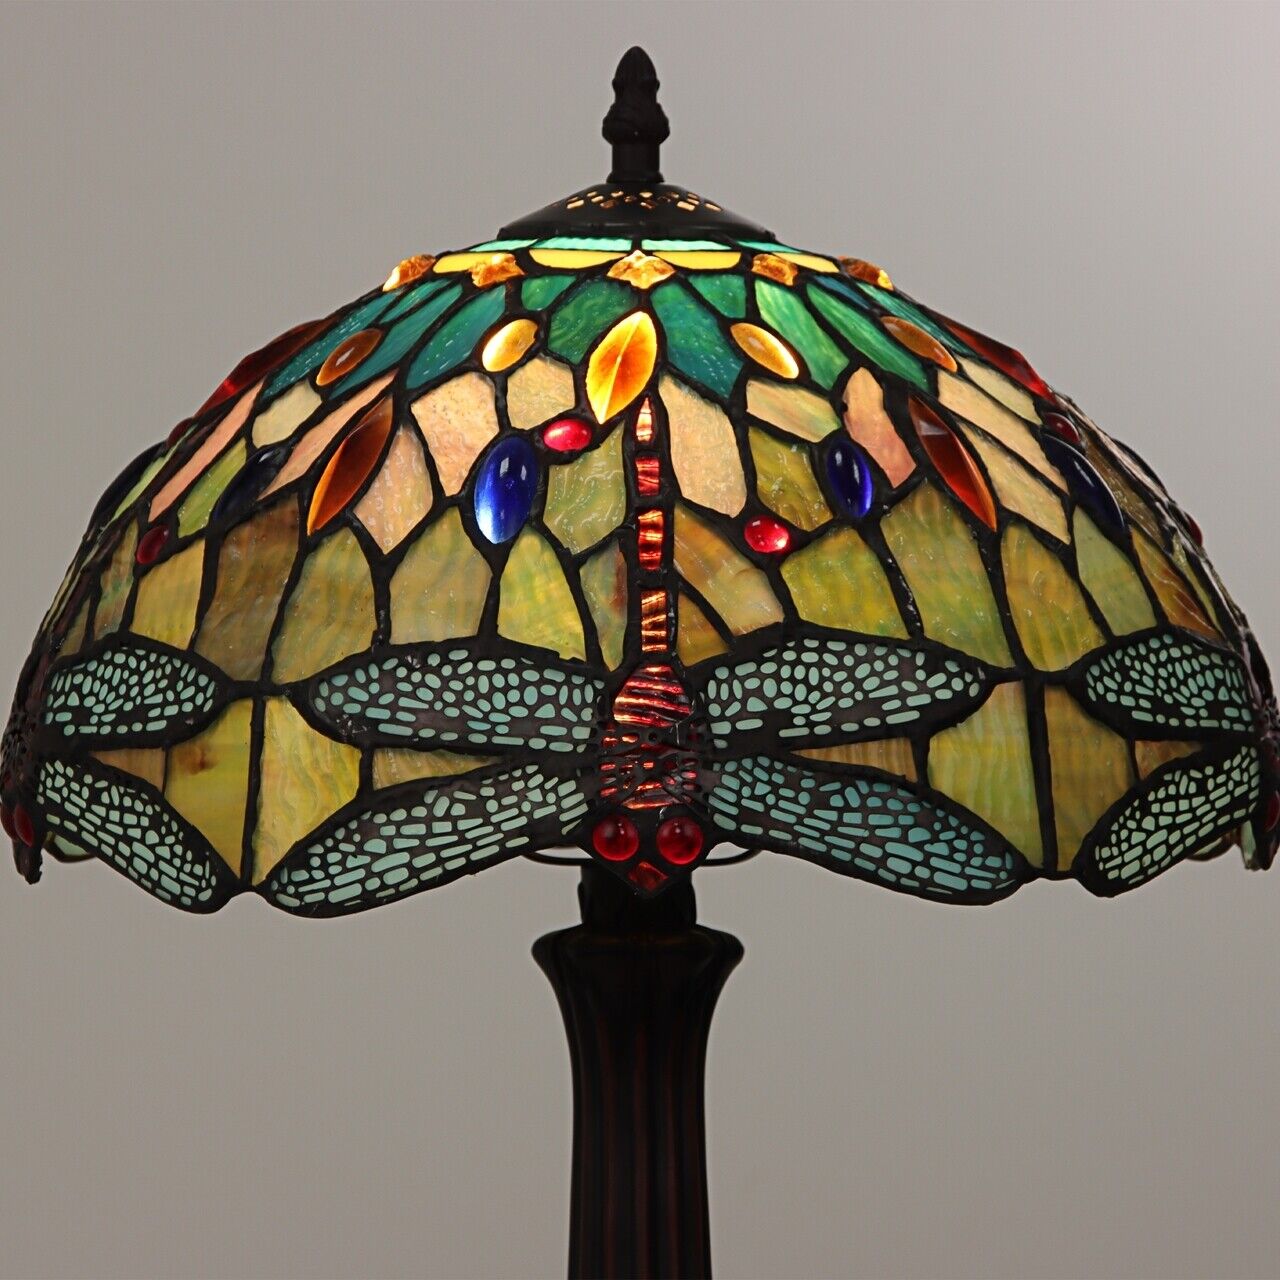 18" Antique Vintage Style Stained Glass Dragonfly Table Lamp